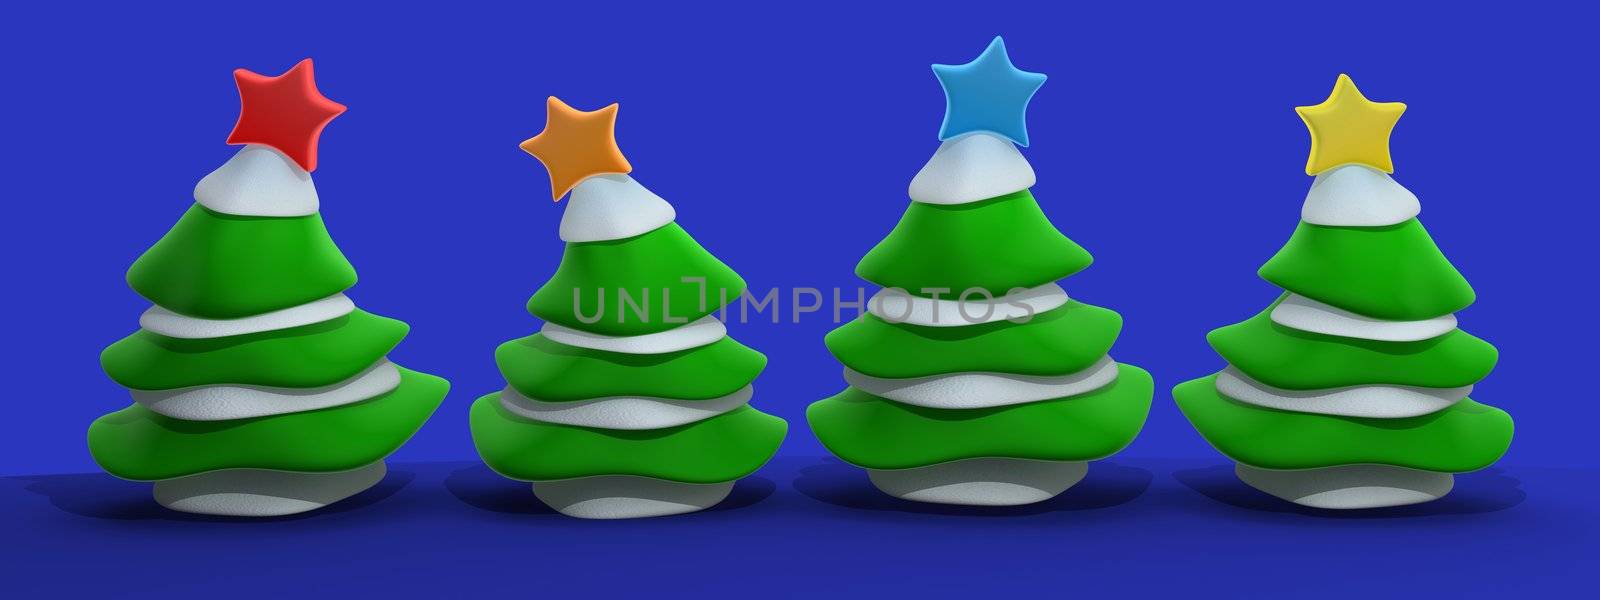 Computer Generated Image - Christmas Trees .